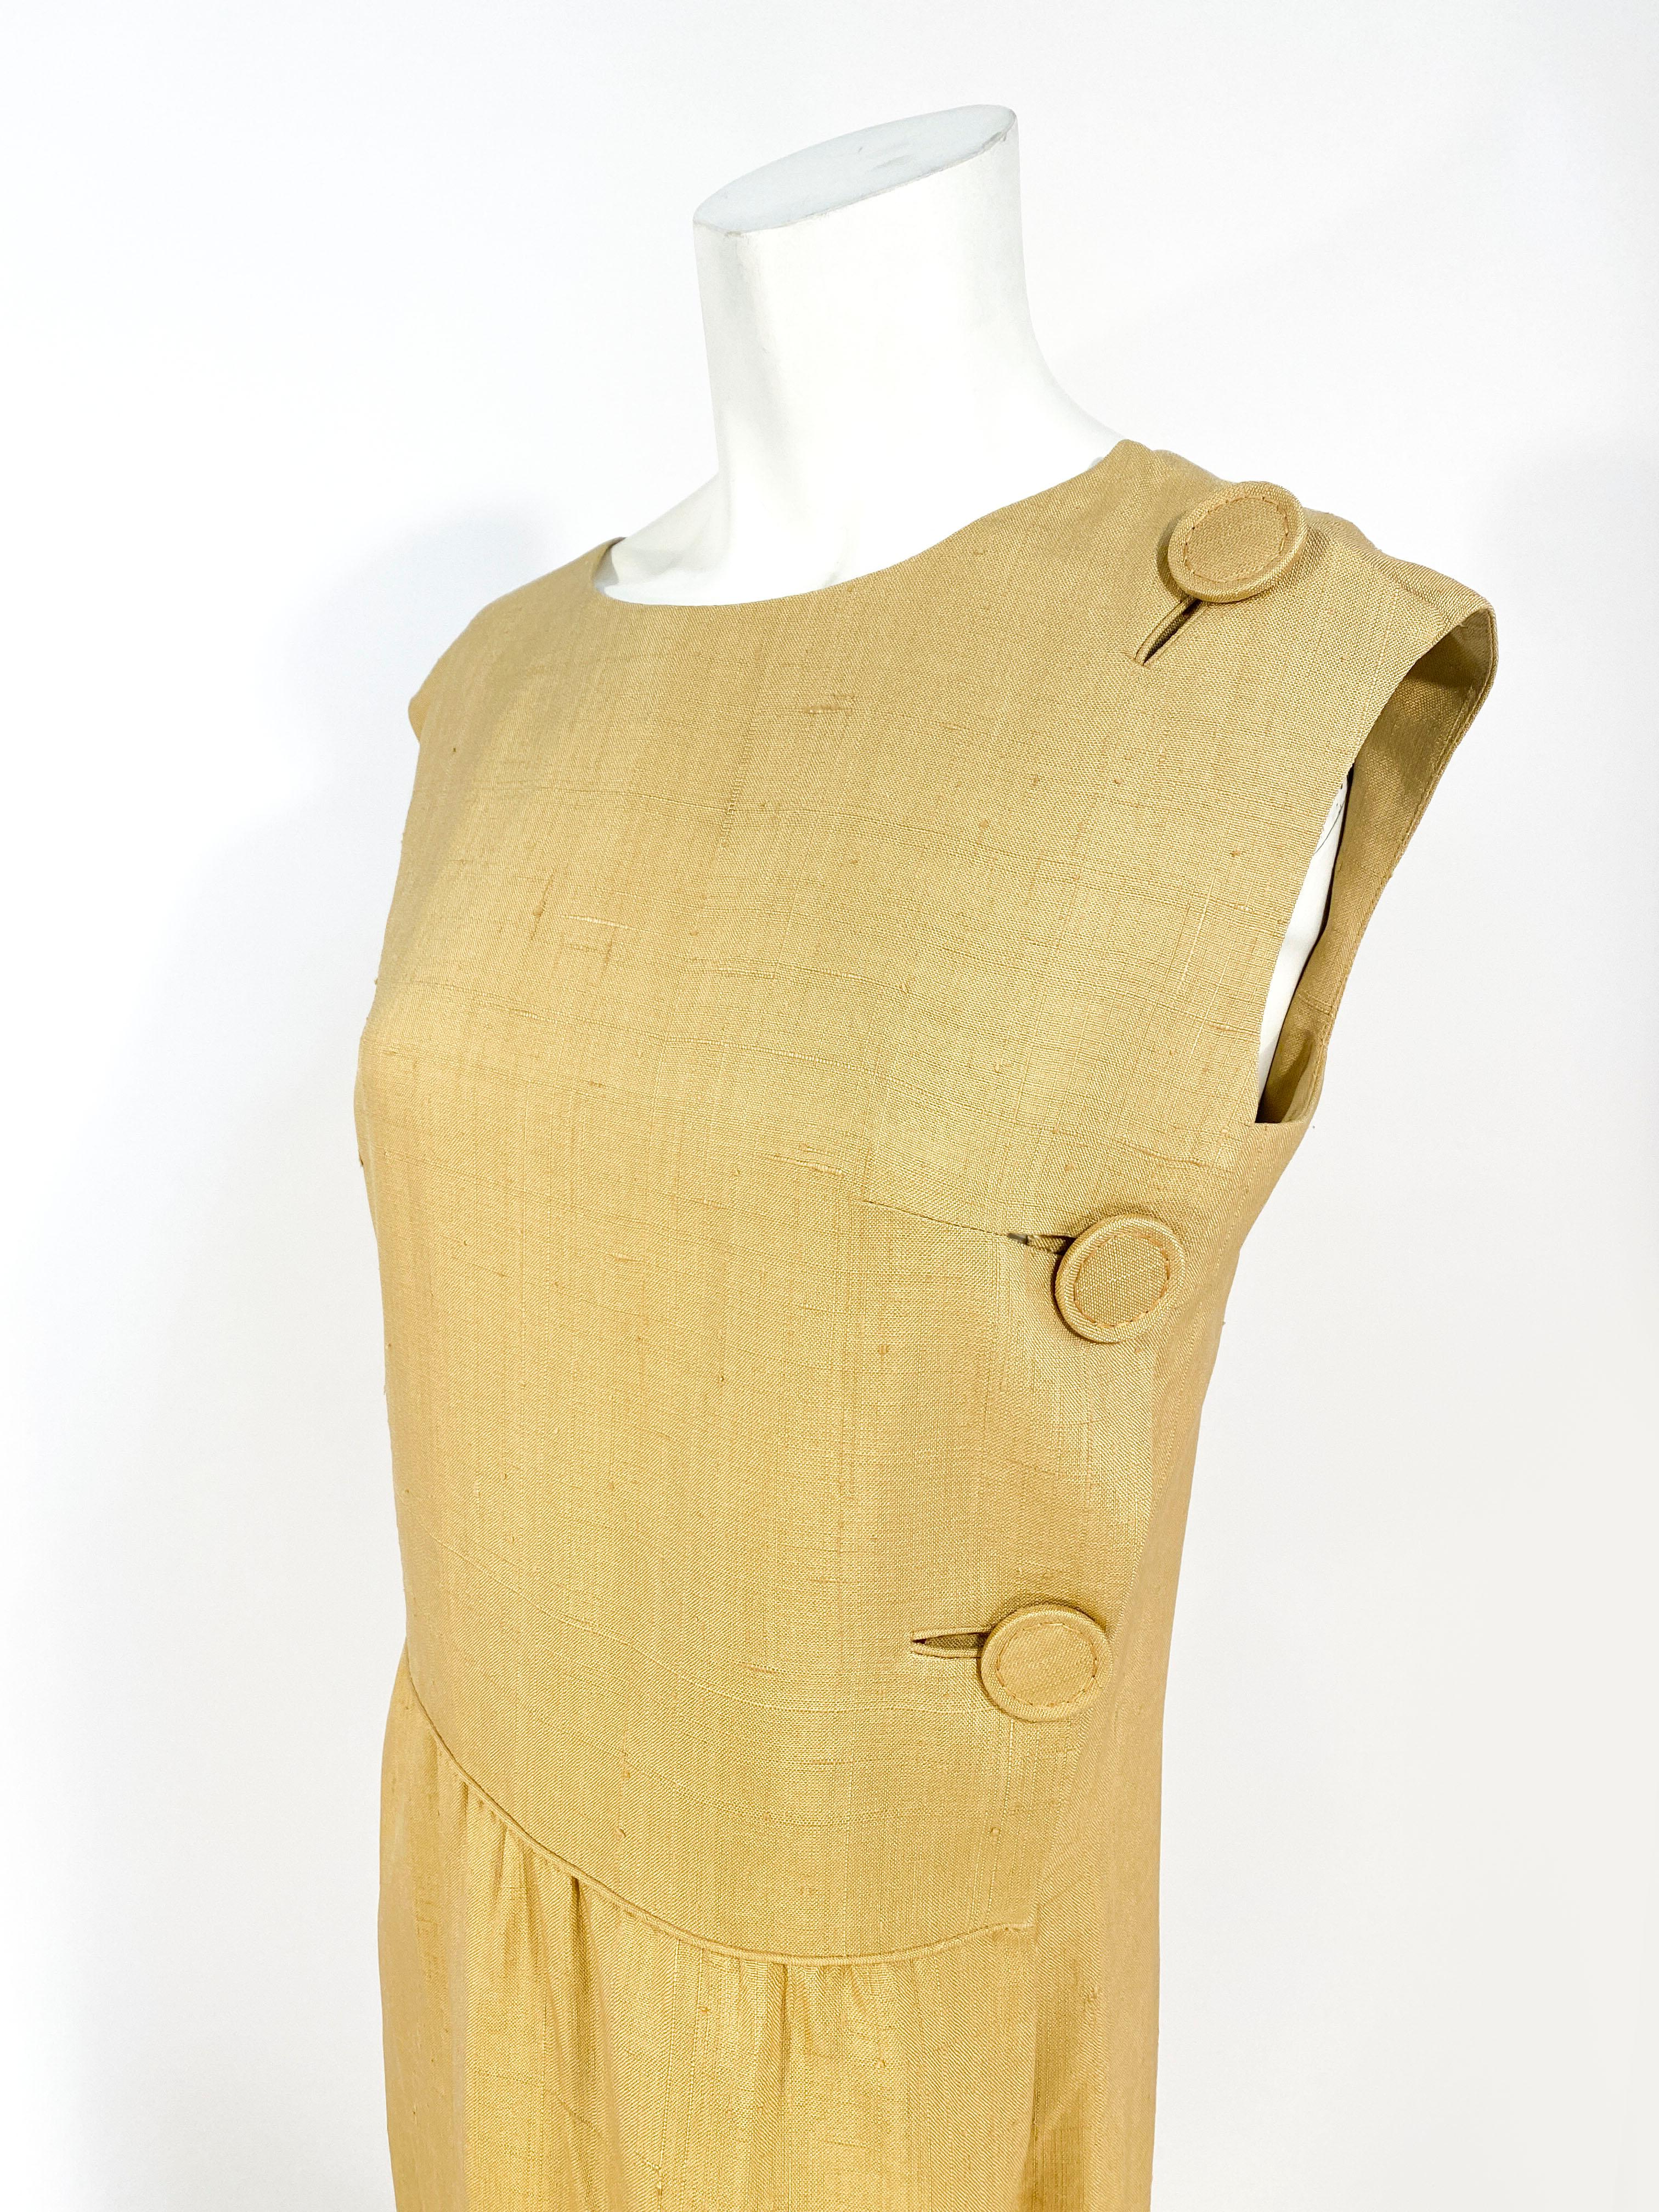 1960s B.H. Wragge drop-waist day dress in a mustard yellow raw silk. This piece features enlarged hand covered designer buttons and in-set button holes.